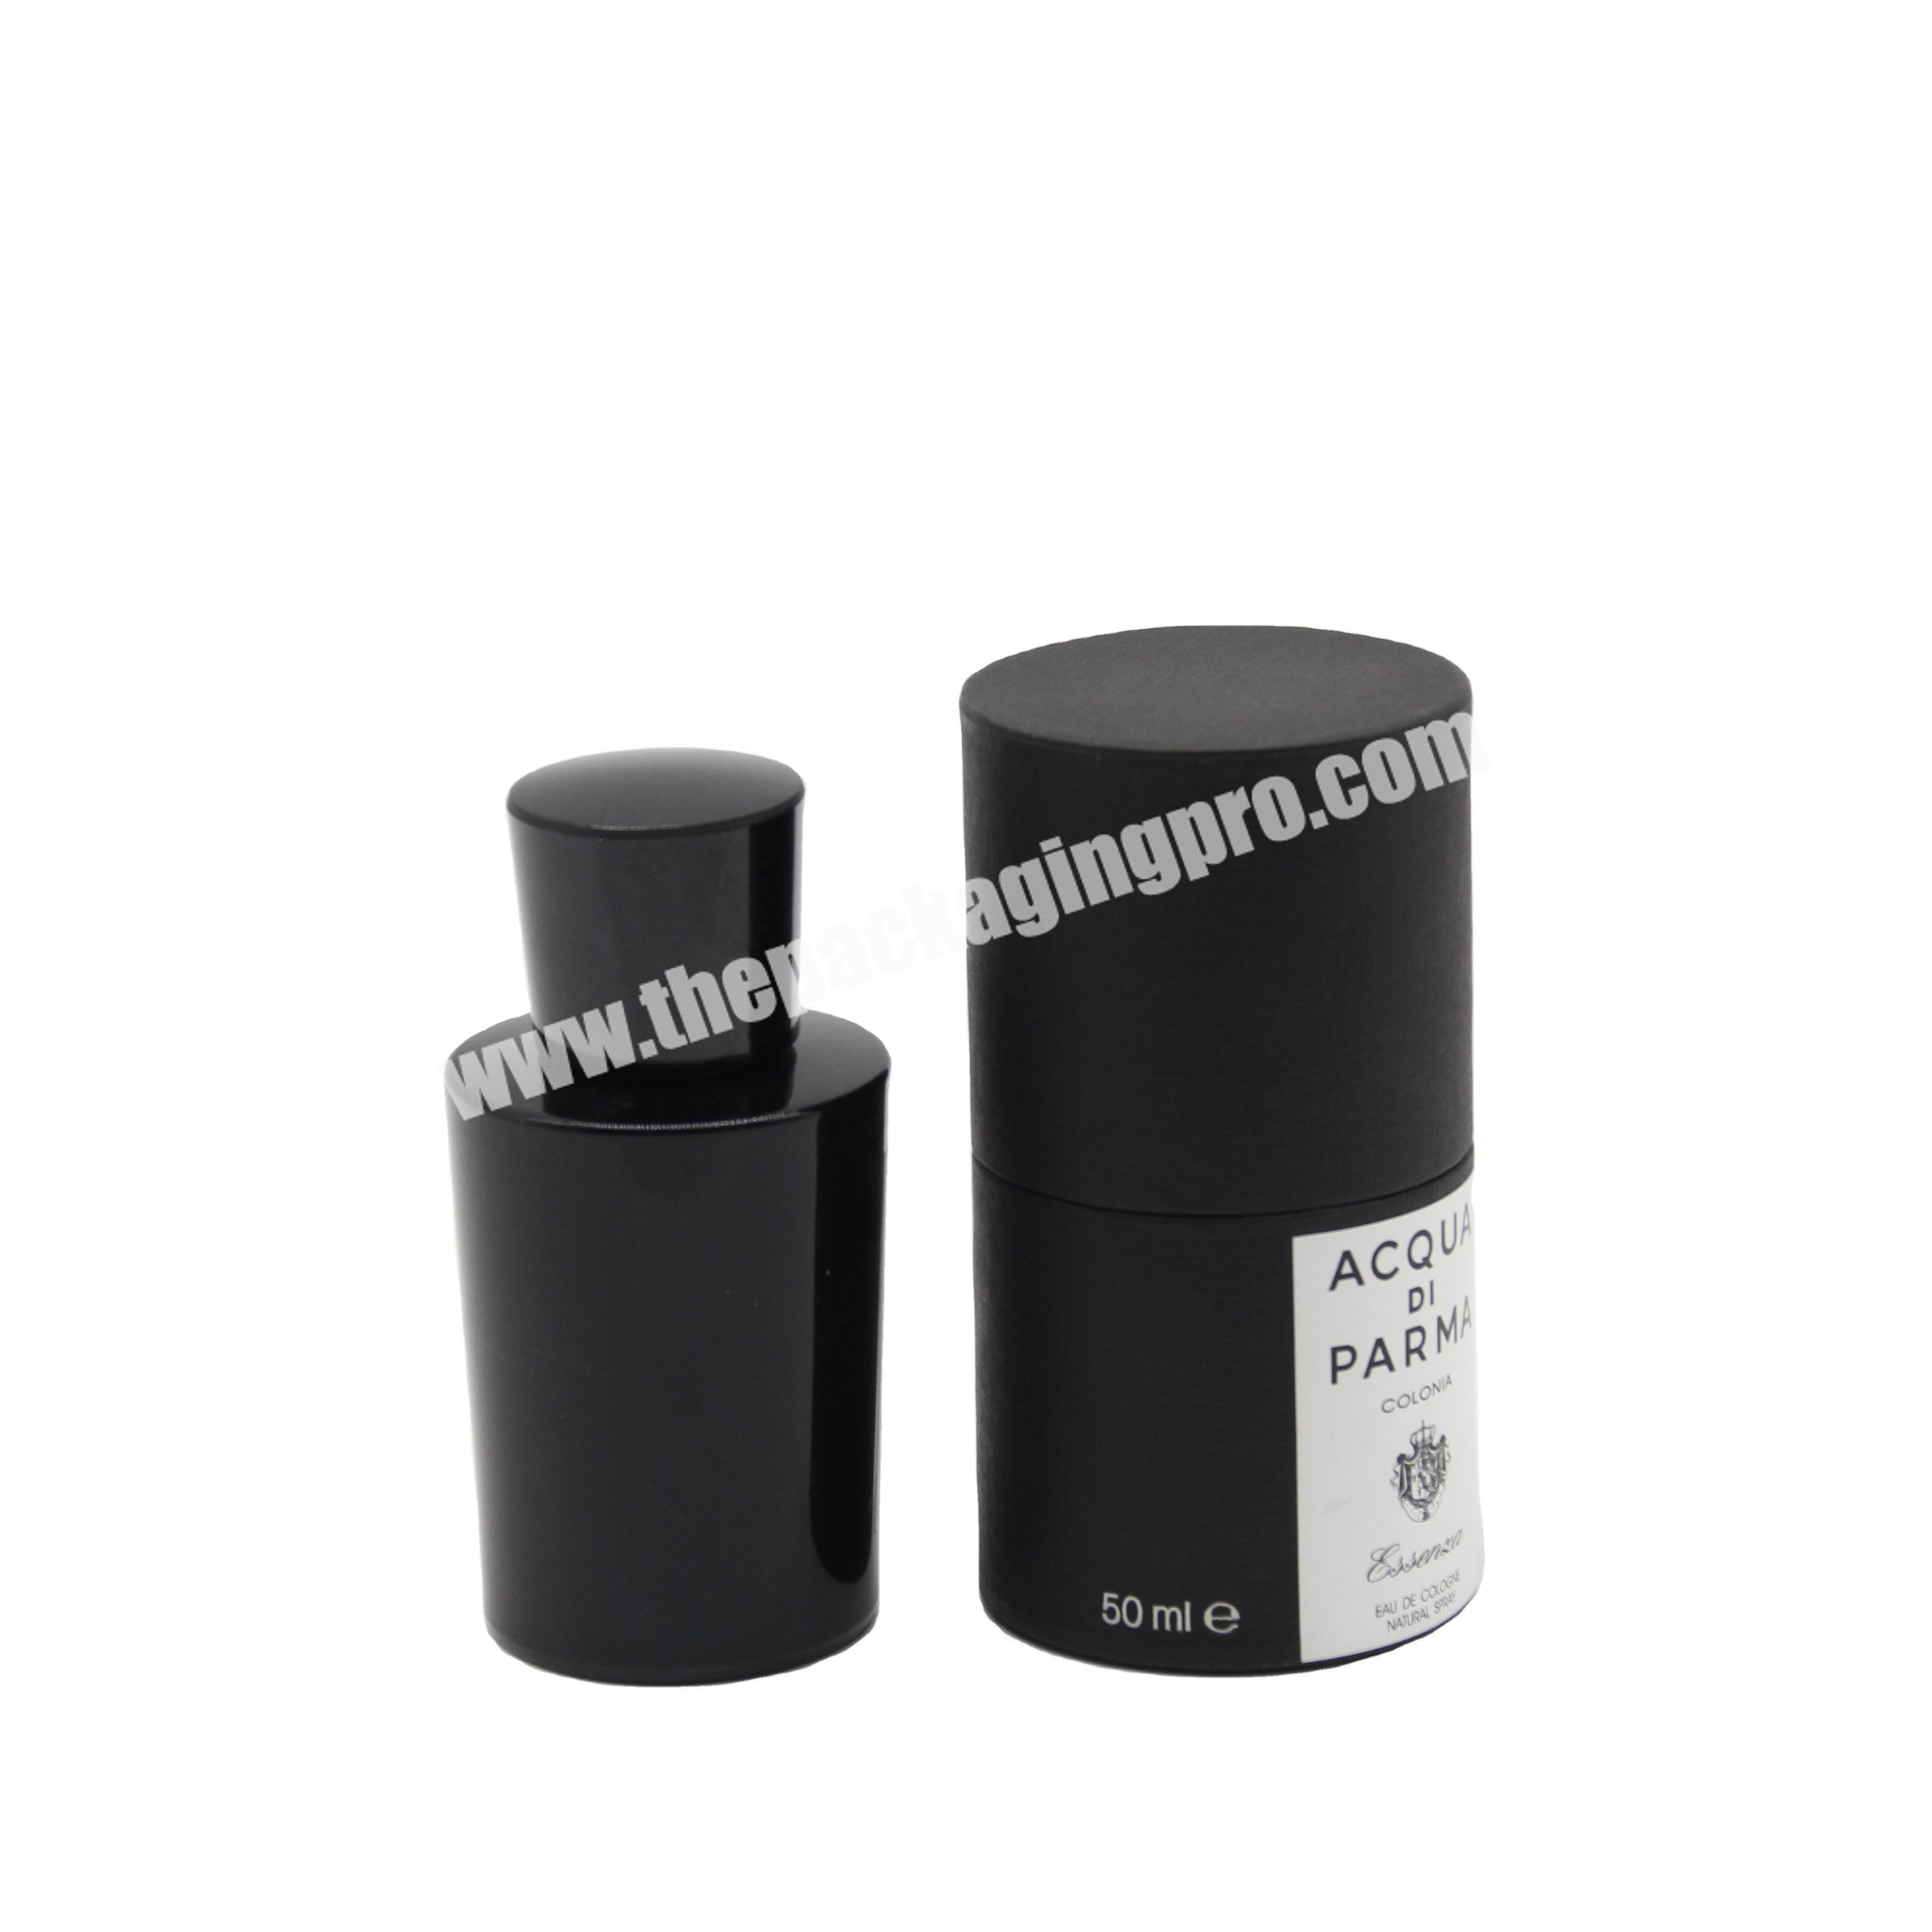 Top Quality perfume Tube box/black Paper Tube with linen texture paper flap lid and bottom